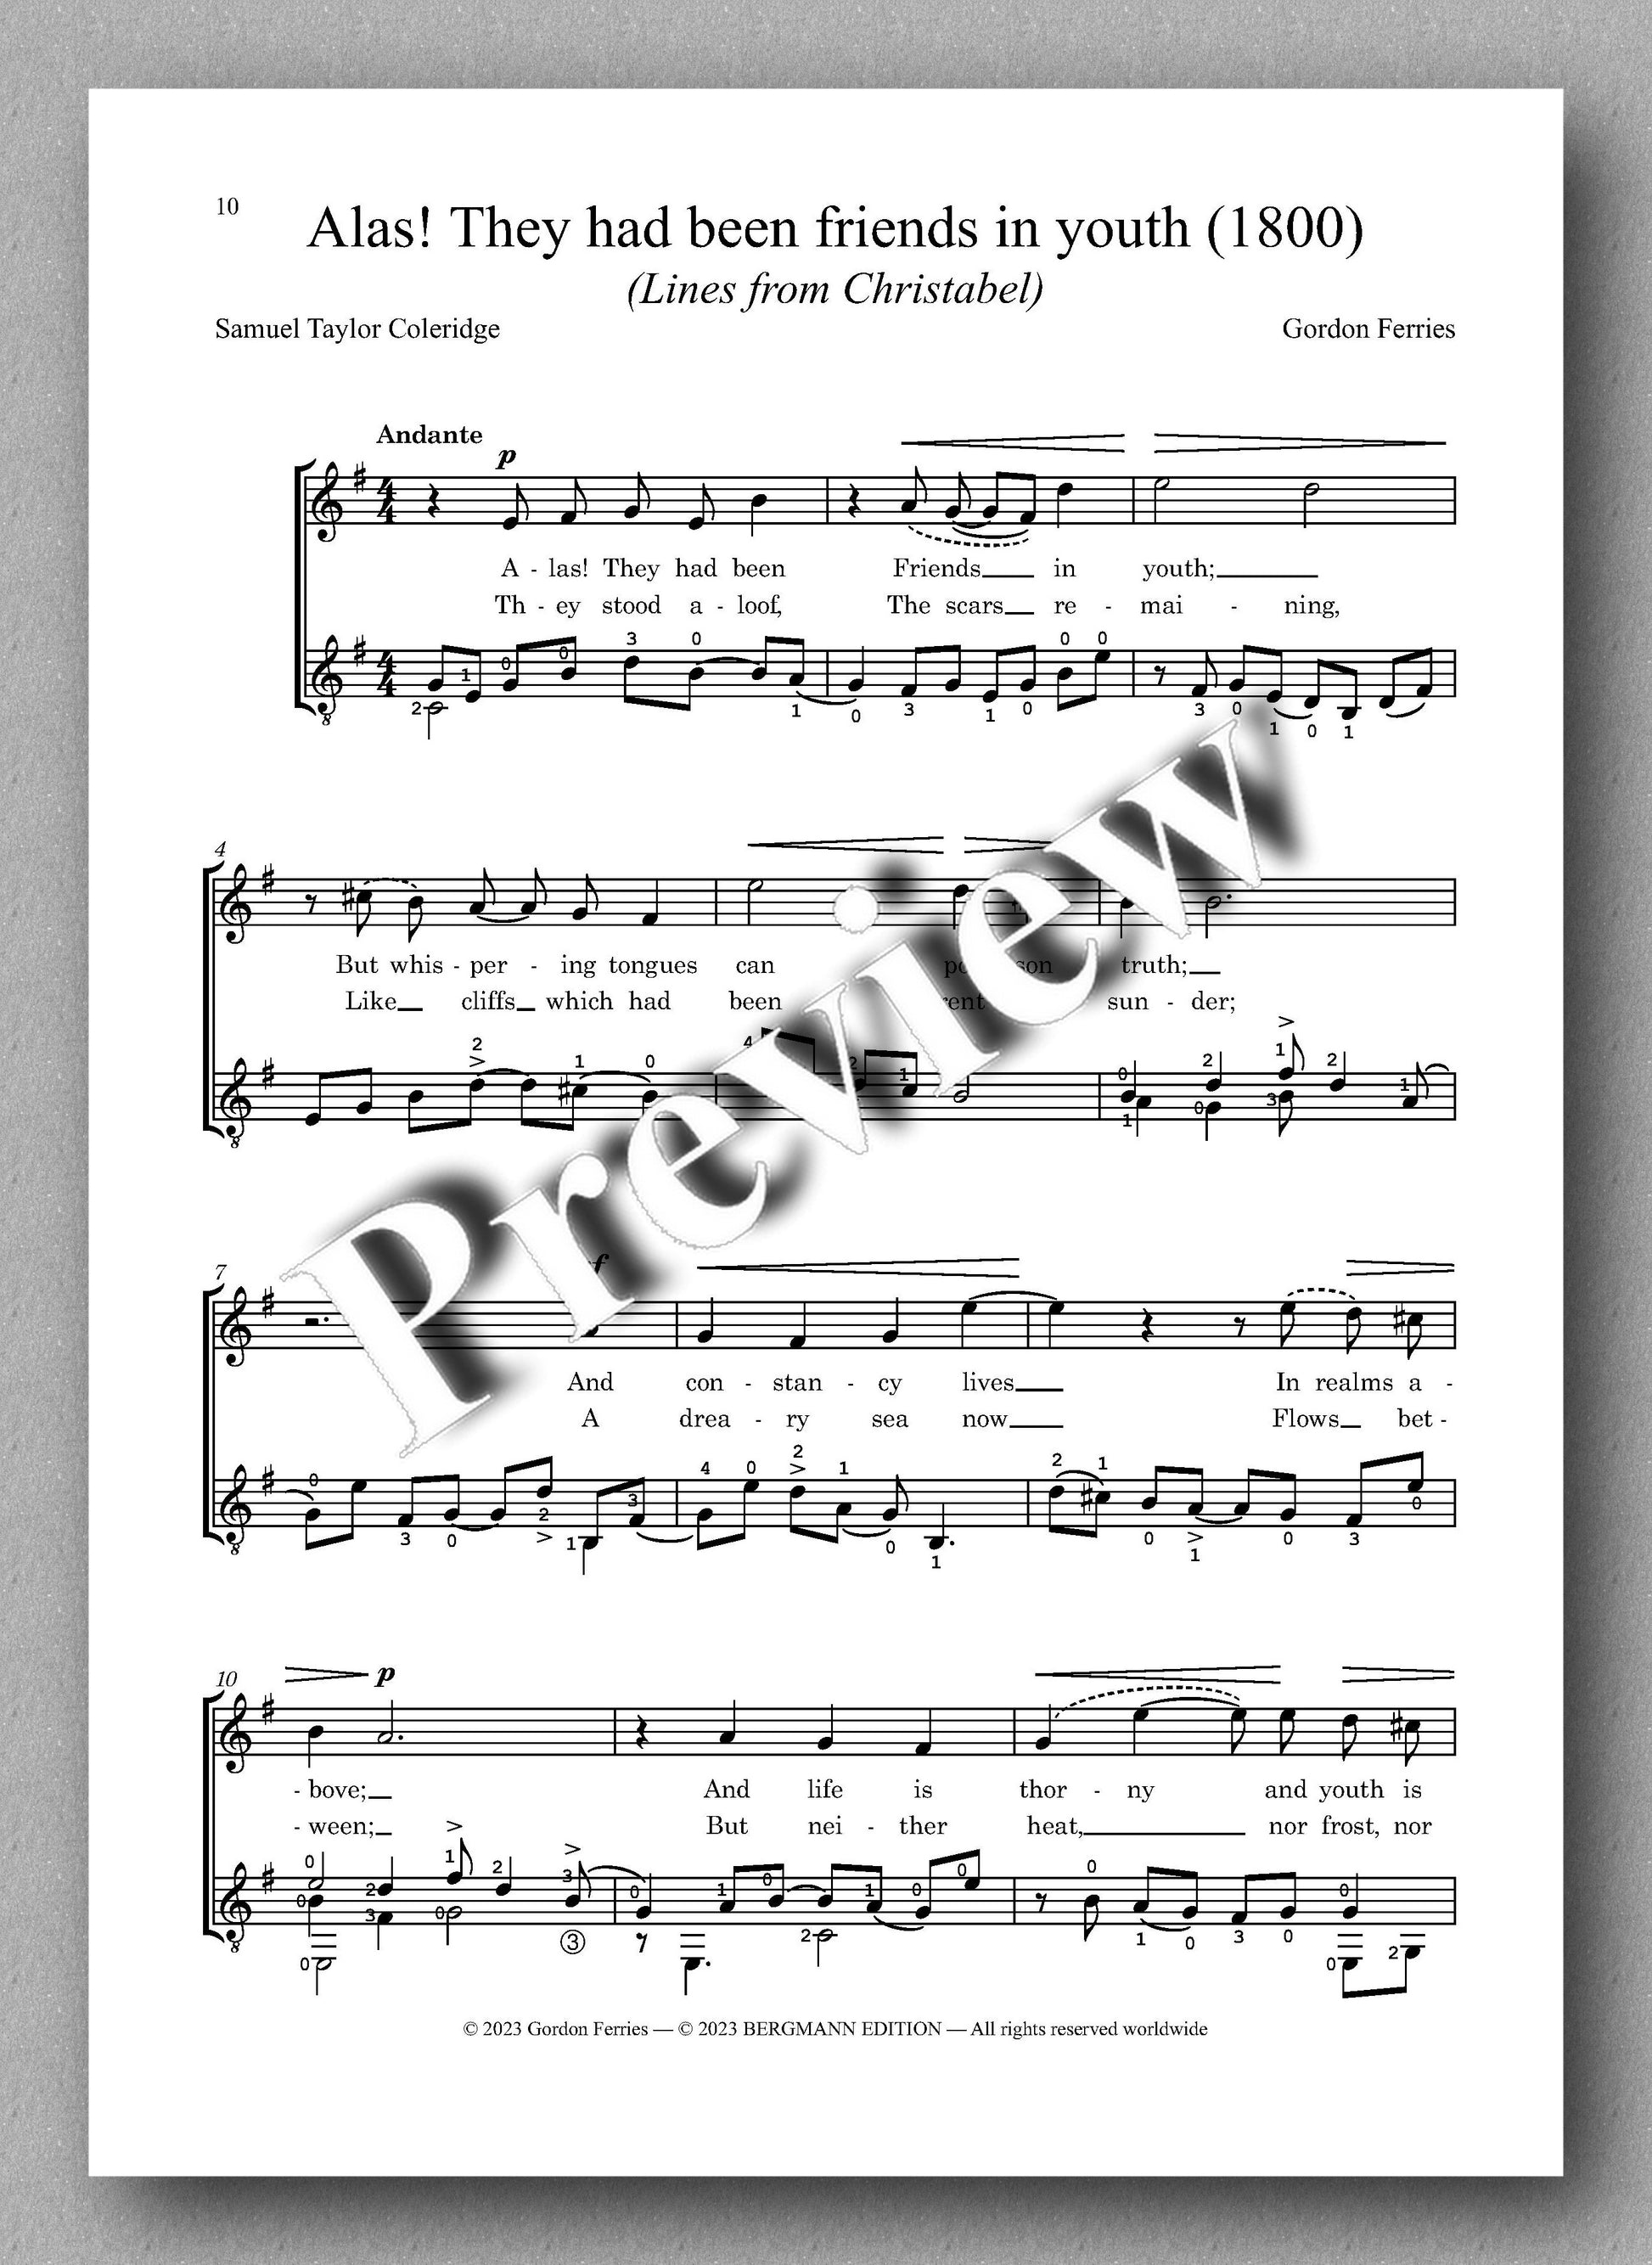 Gordon Ferries, Stanzas for music - preview of the music score 2